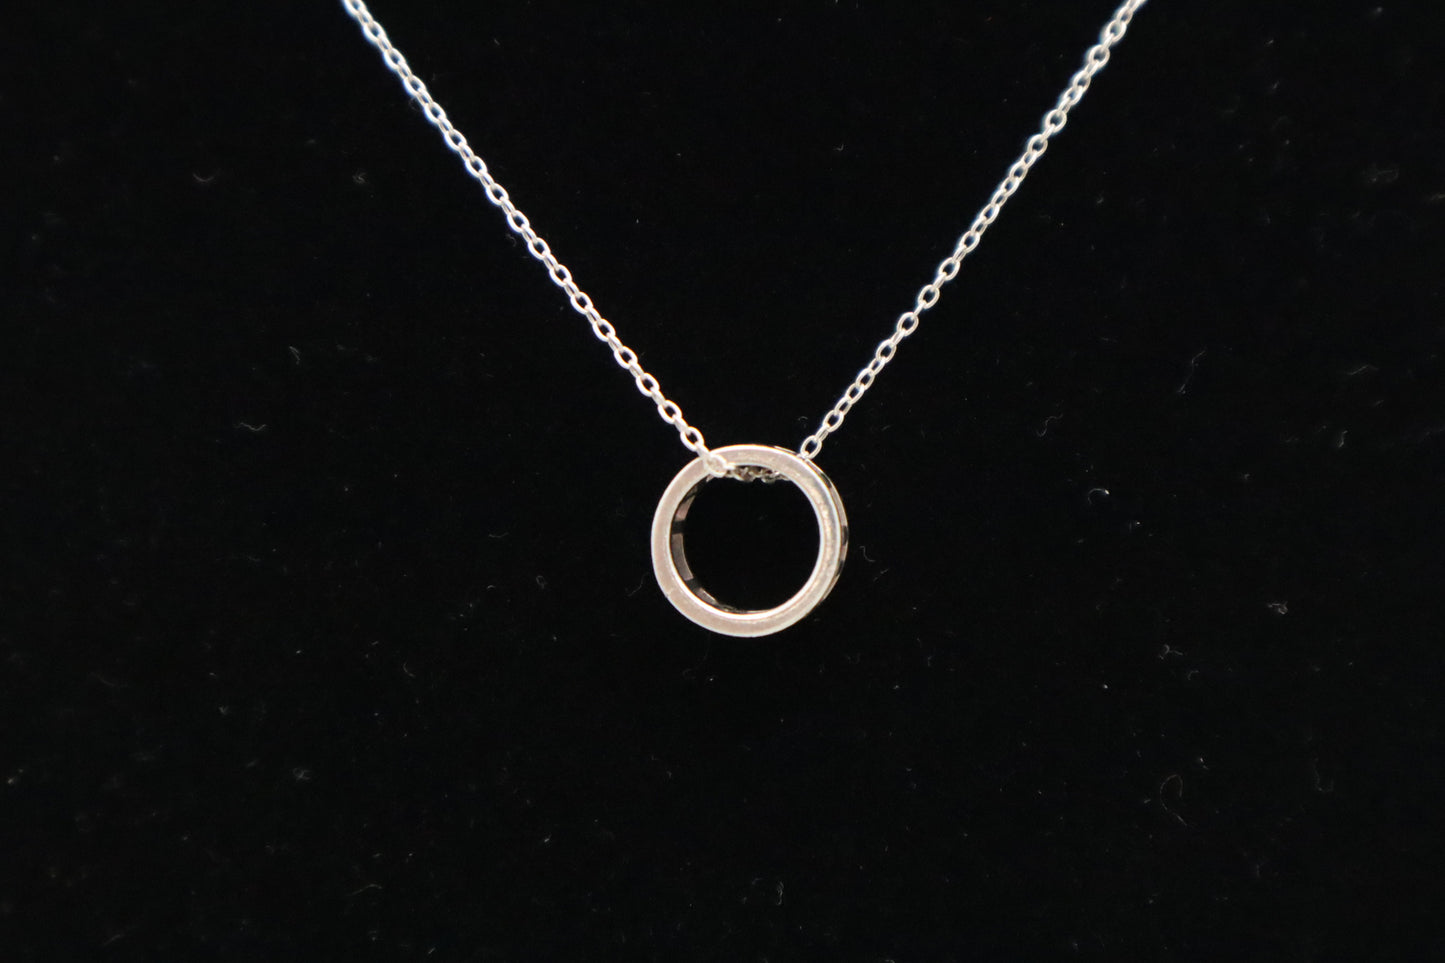 Tiffany & Co. Atlas Ring Necklace in Sterling Silver